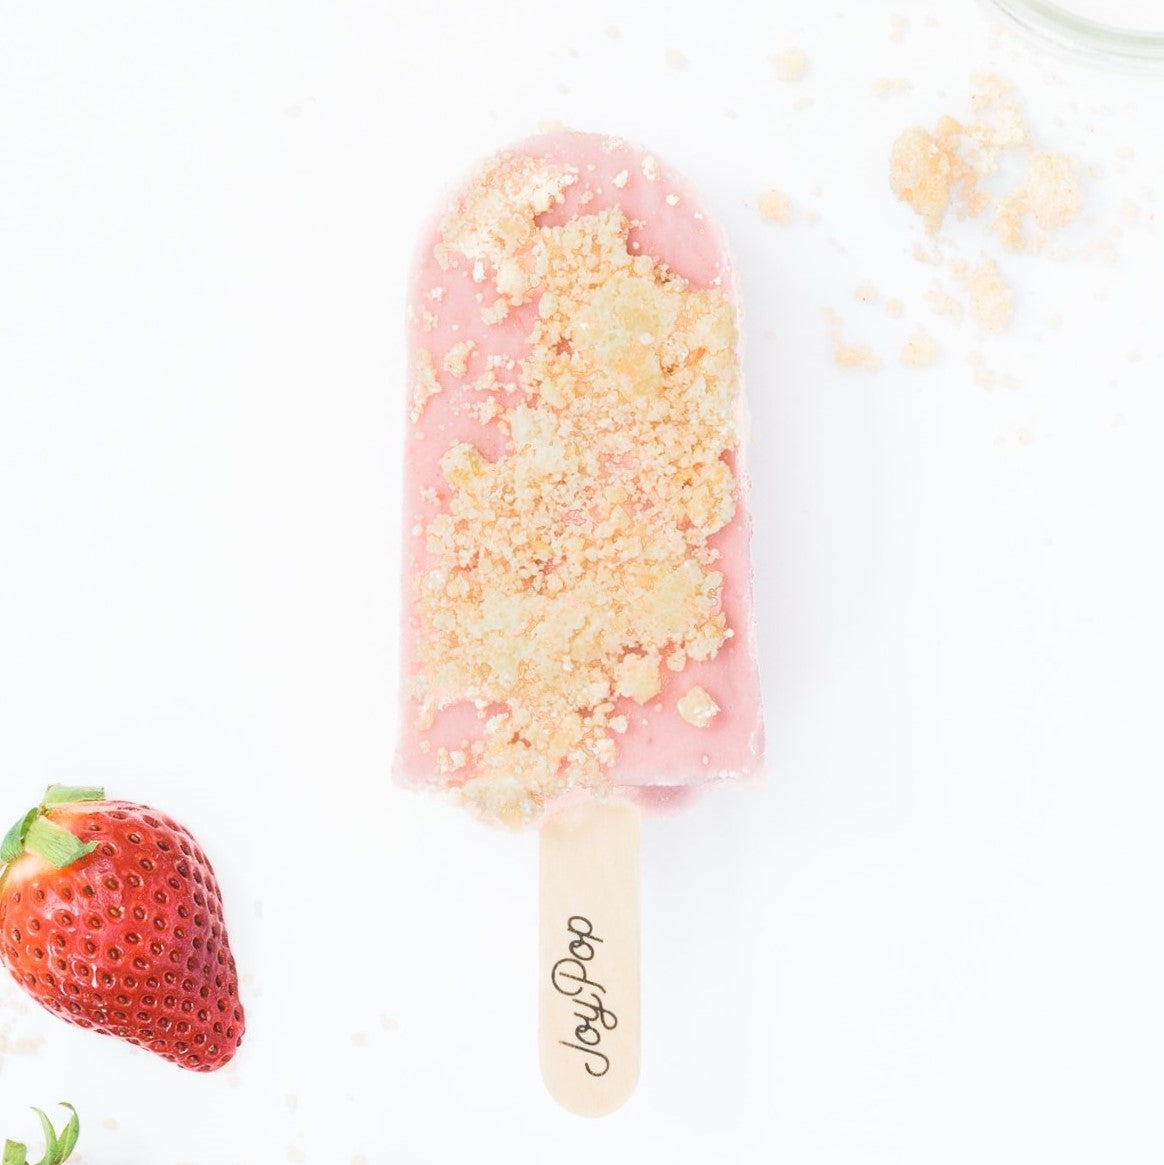 strawberries and cream frozen pop from The Joy Pop Co with fresh strawberries and shortbread crumble and a glass of milk on a white background